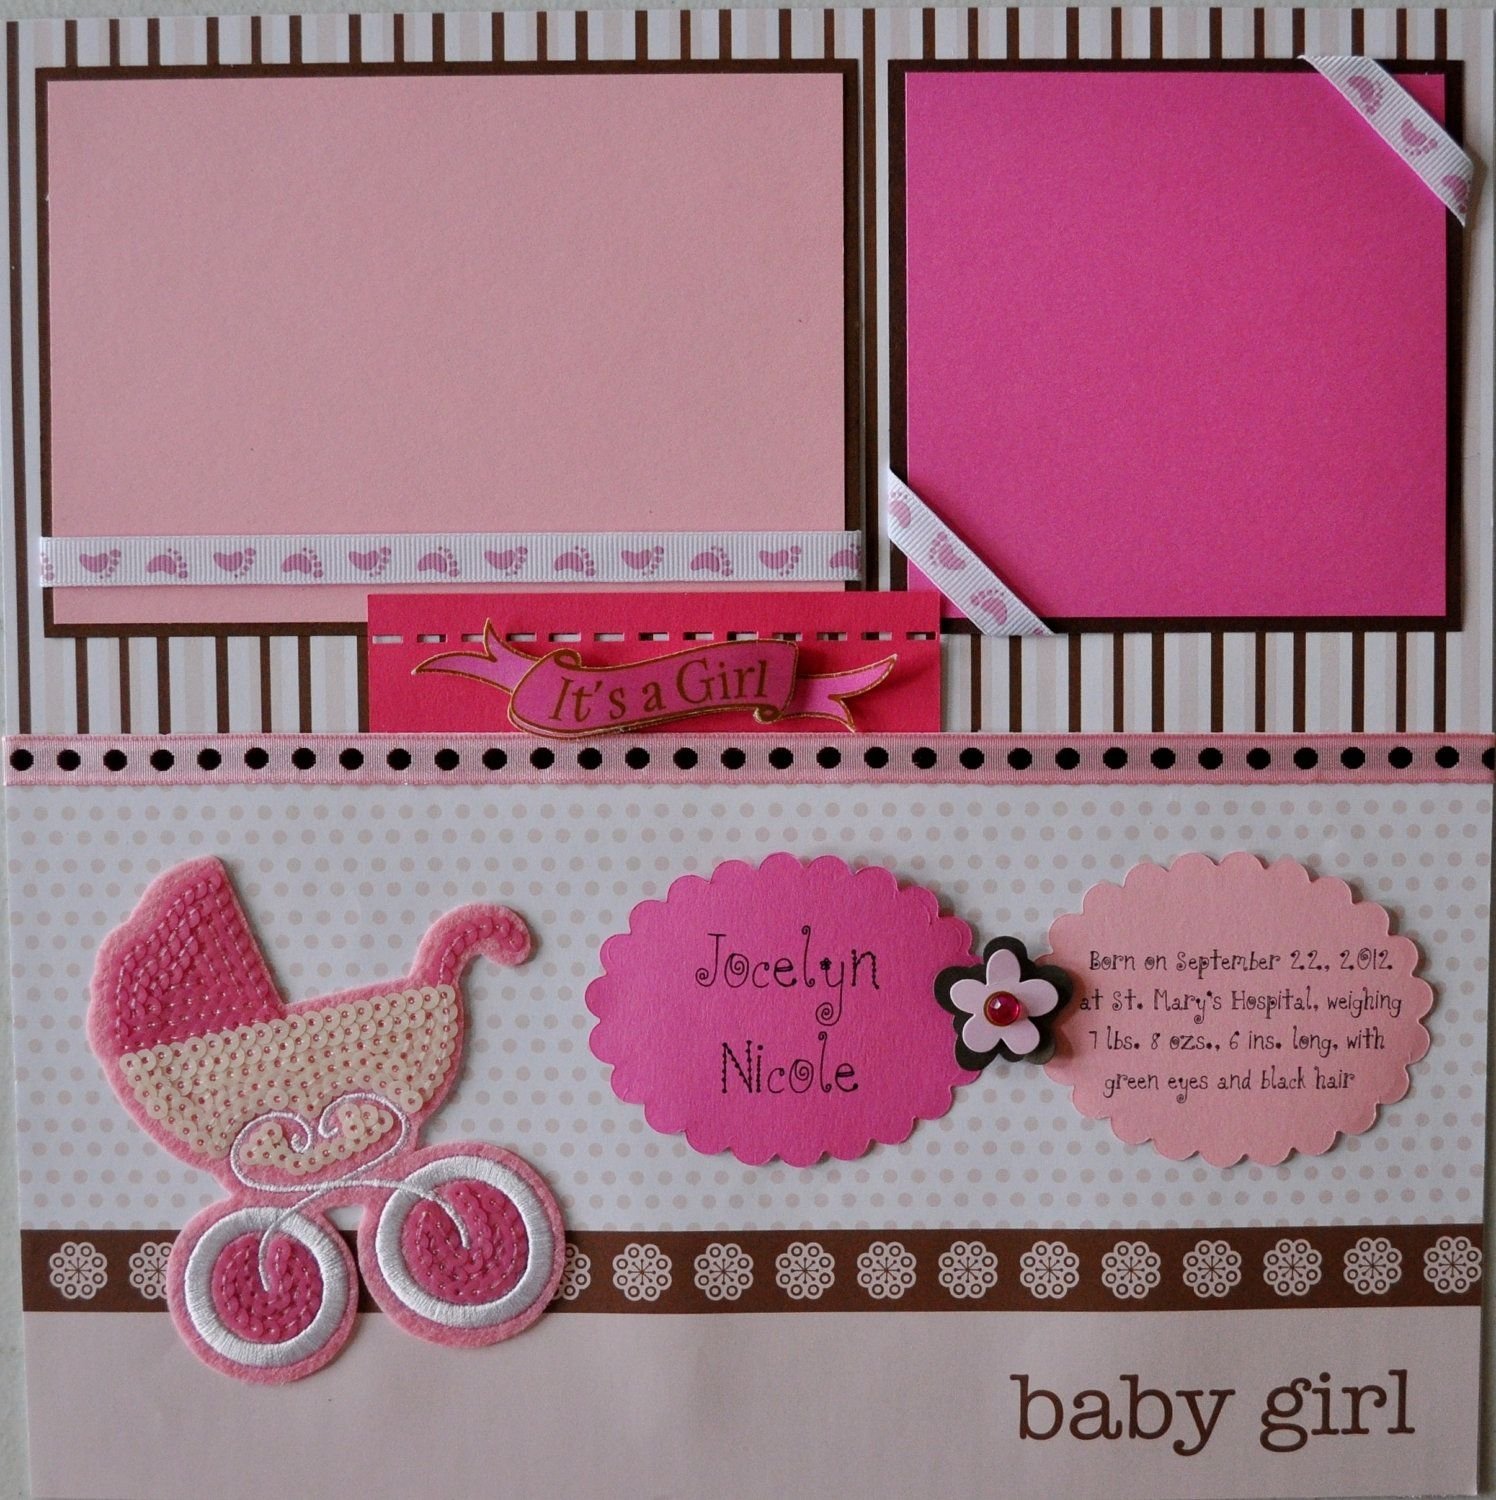 10 Trendy Scrapbooking Ideas For Baby Girl baby girls first year 22 premade scrapbook album pages 135 00 2022